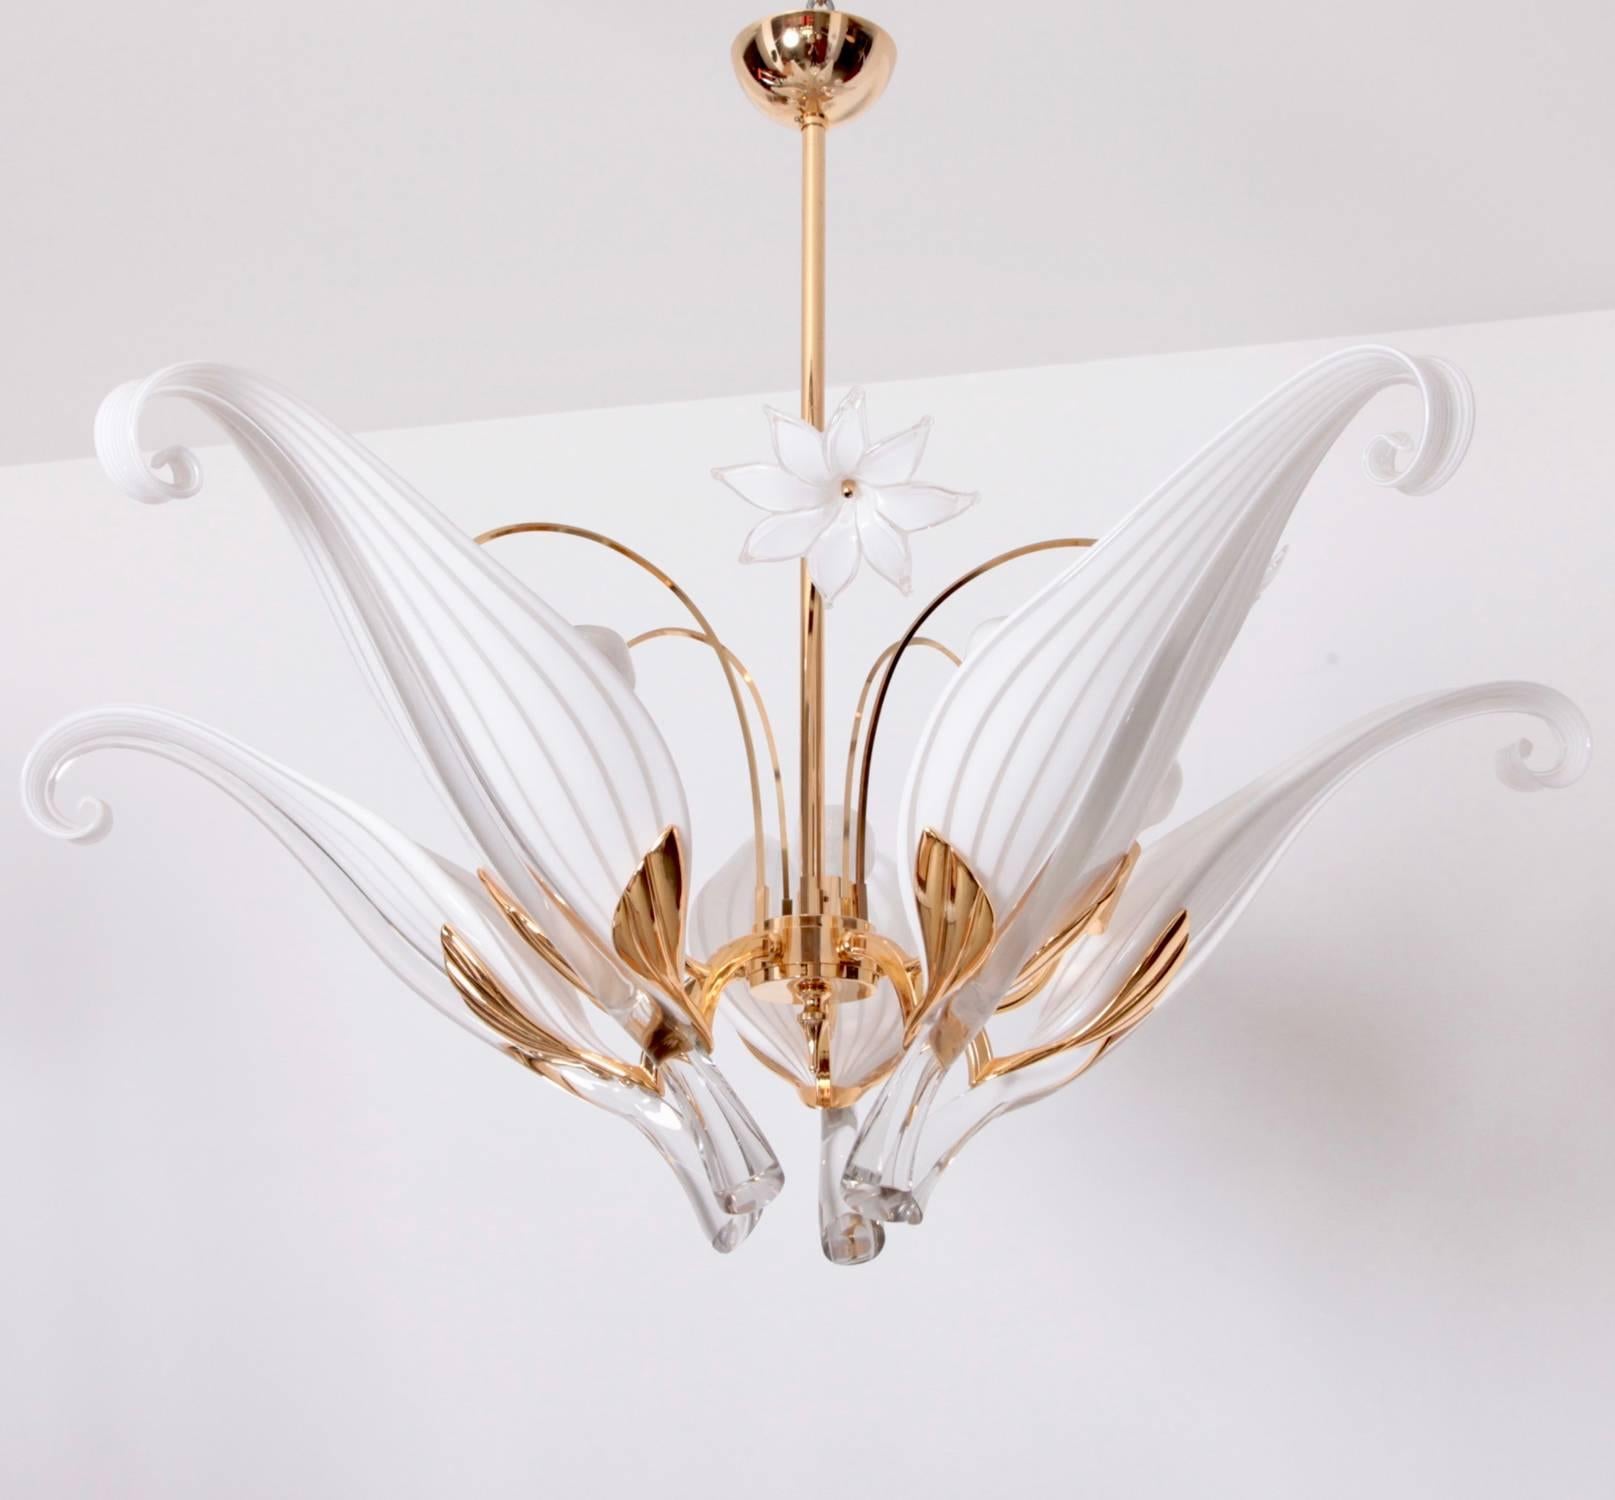 This impressive Italian chandelier, by Franco Luce, produced, circa 1970s, features five handblown white Murano glass curled leaves, each rendered through Sommerso technique and individually set in holders, supported by a brass frame; each glass